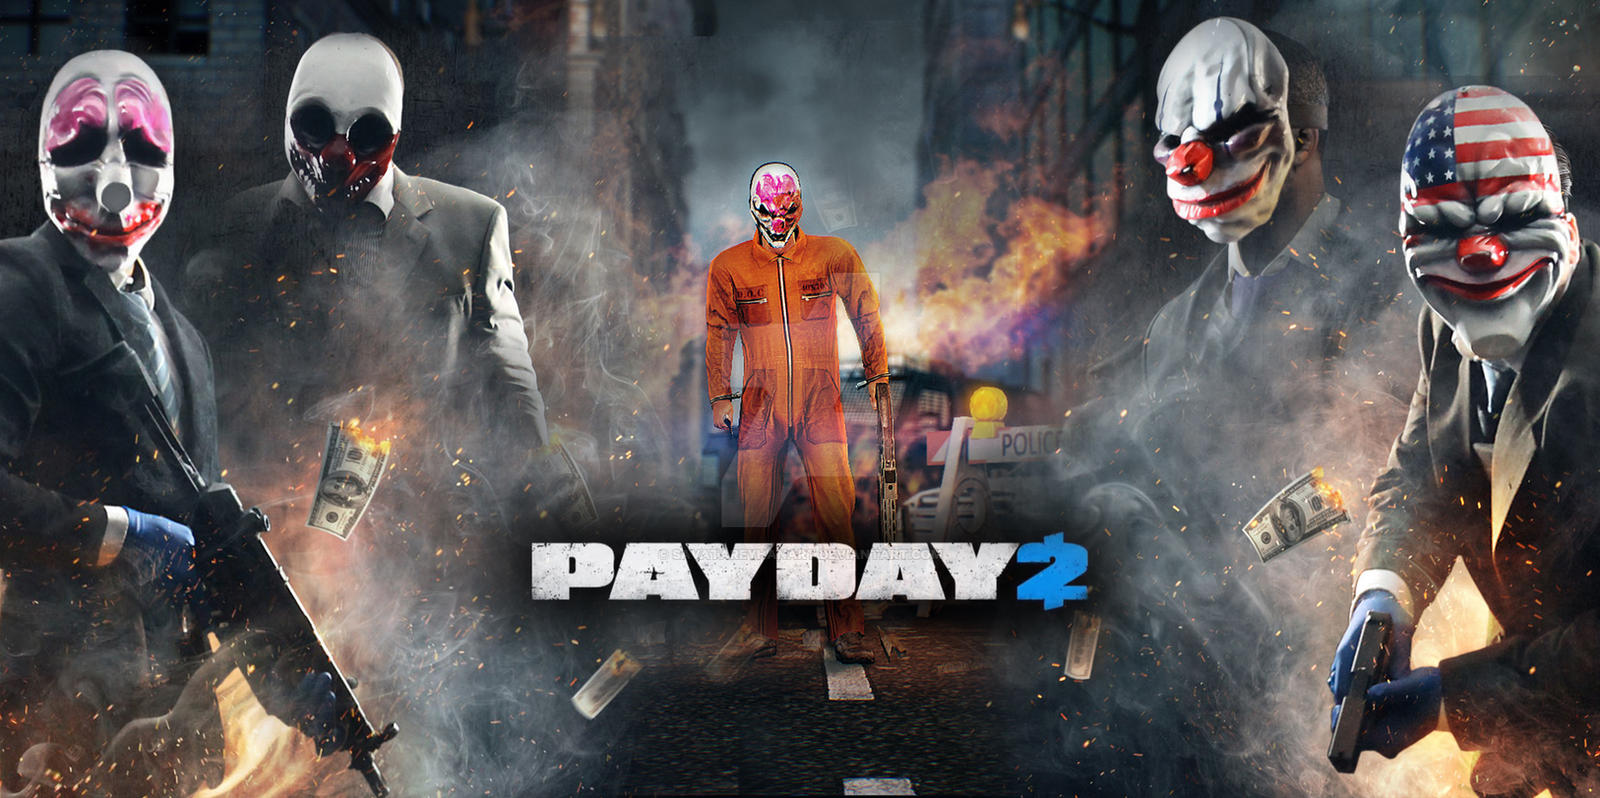 Lobby in payday 2 фото 108